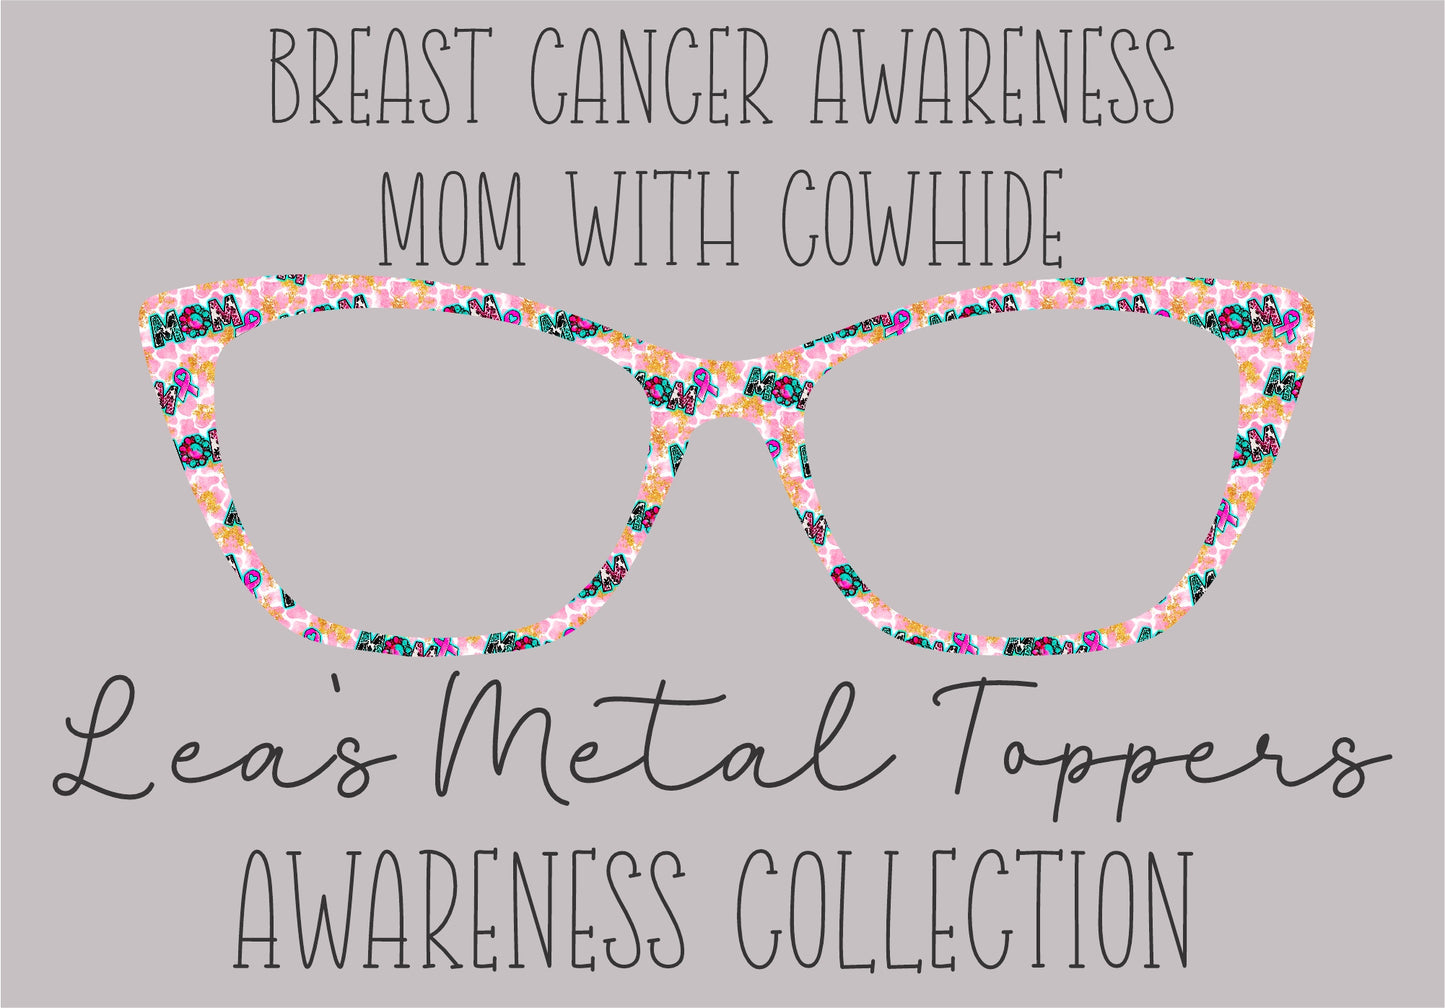 BREAST CANCER AWARENESS MOM WITH COWHIDE Eyewear Frame Toppers COMES WITH MAGNETS